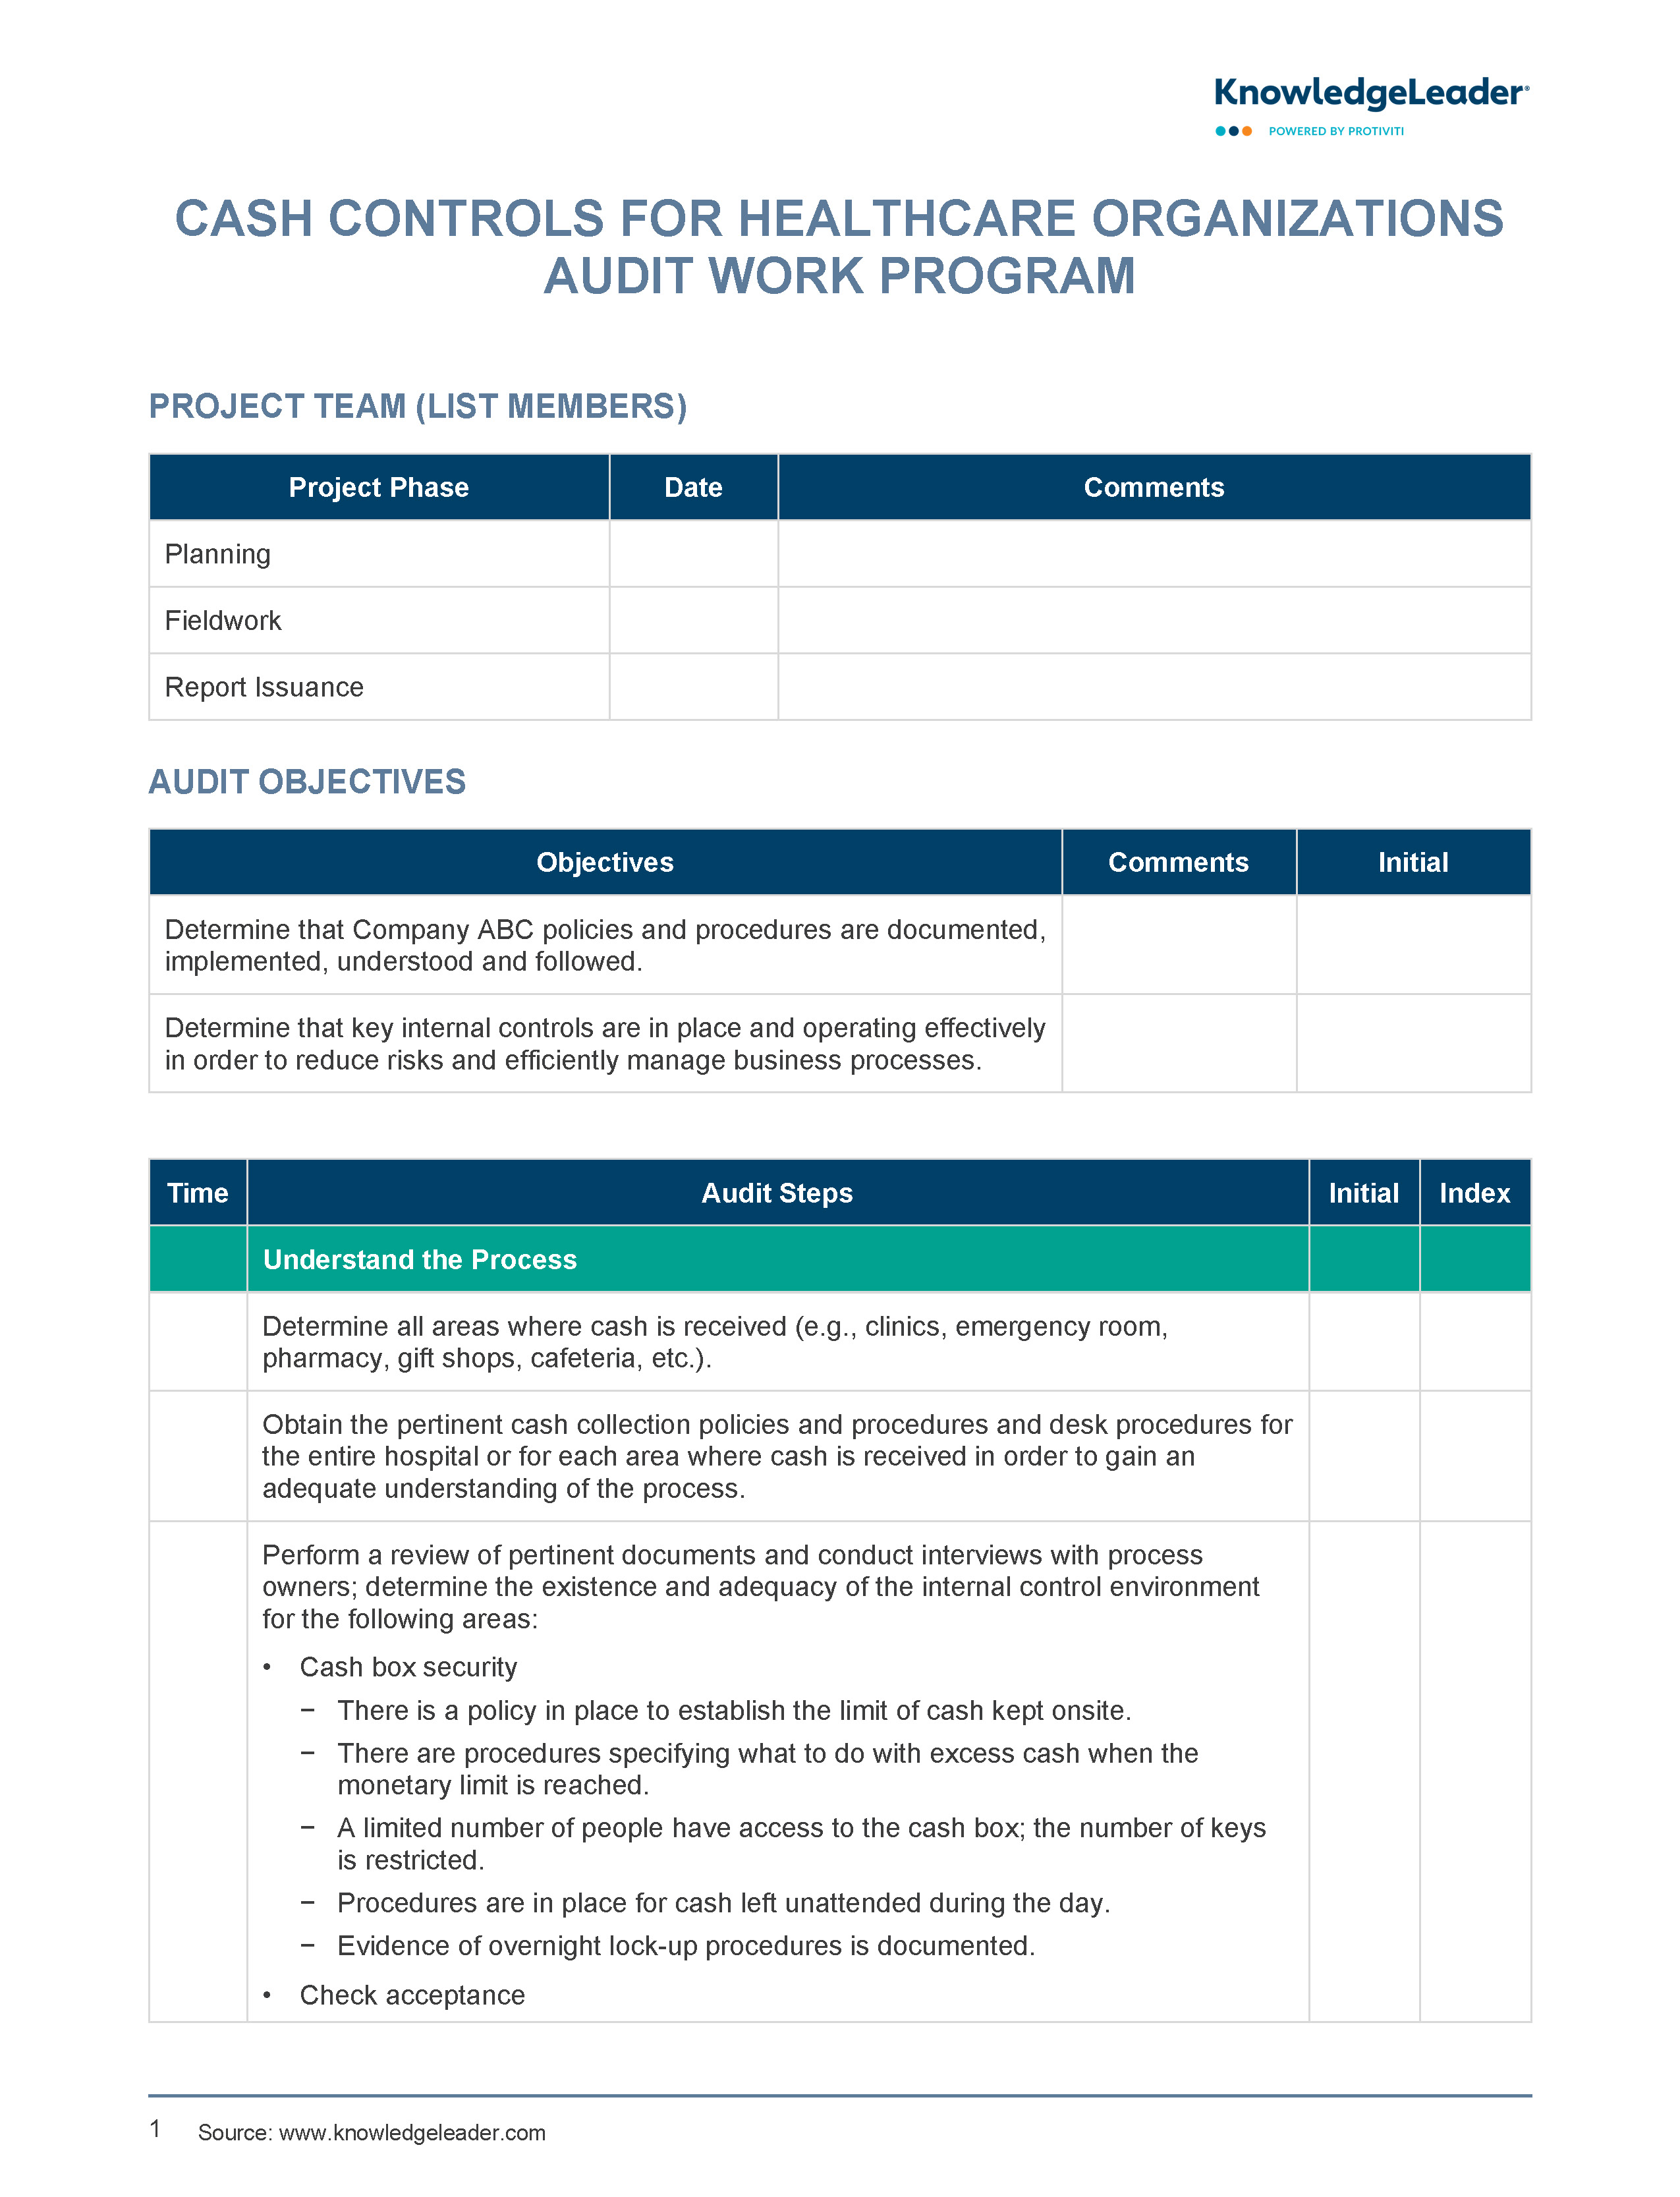 screenshot of the first page of Cash Controls Audit Work Program: Healthcare Organizations